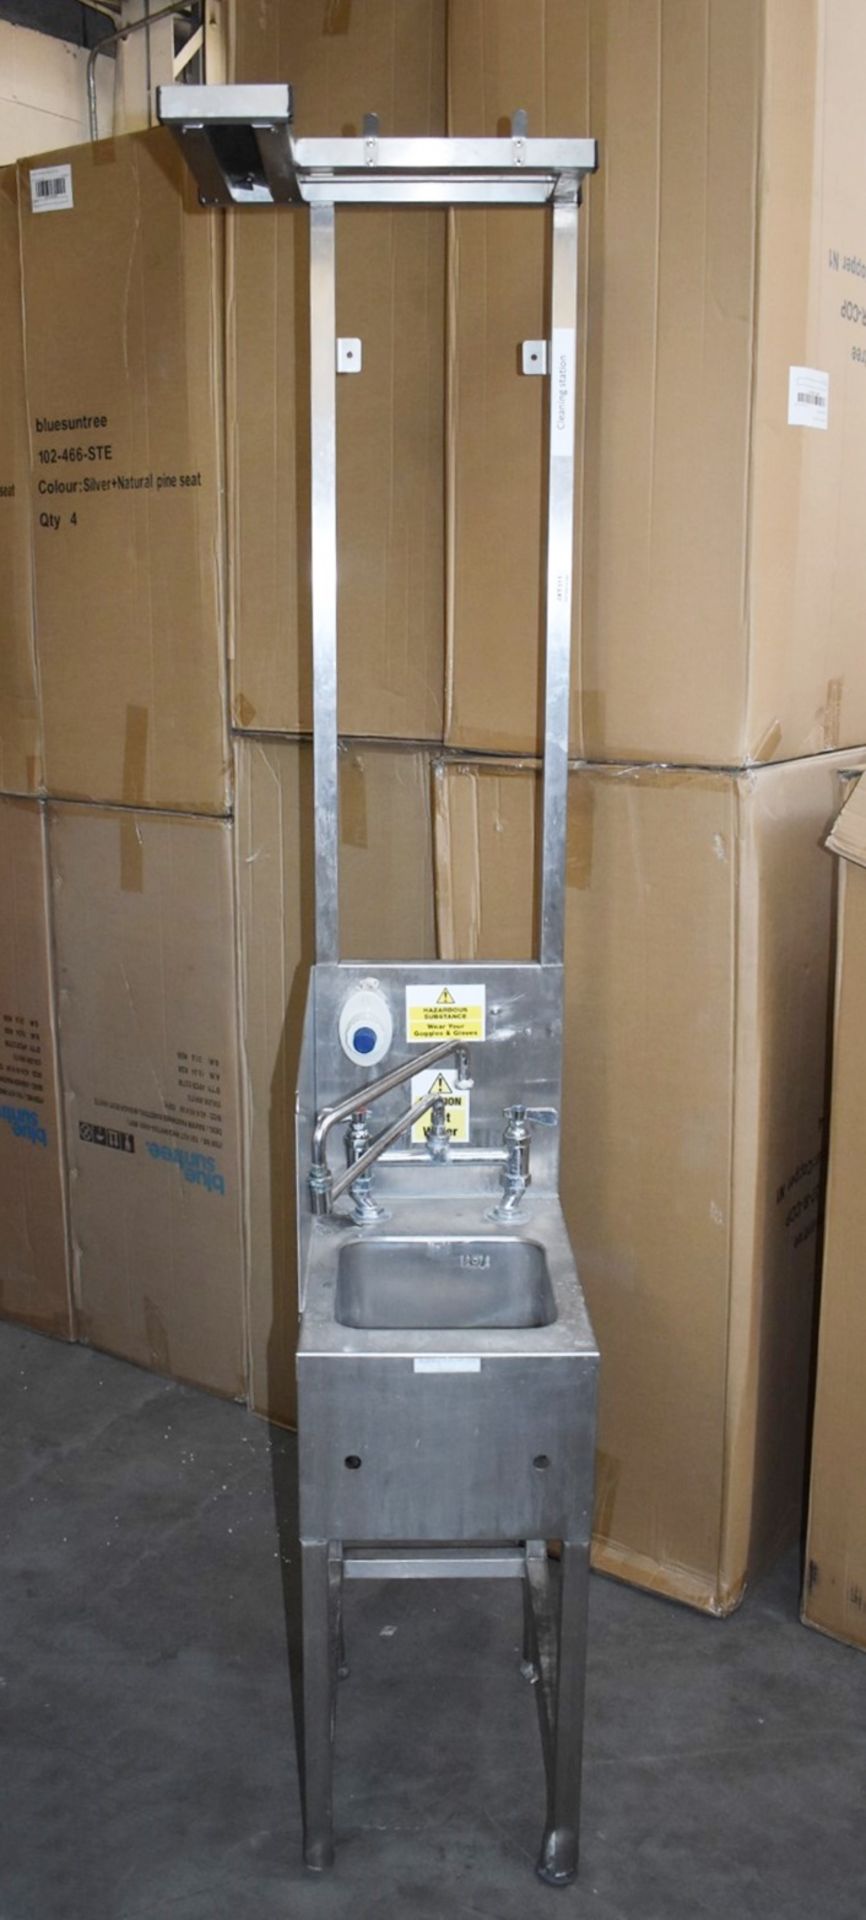 1 x Slim Janitorial Wash Station - Features Wash Bowl, Mop Hanger, Goggle Hook, Detergent Pump & Tap - Image 2 of 5